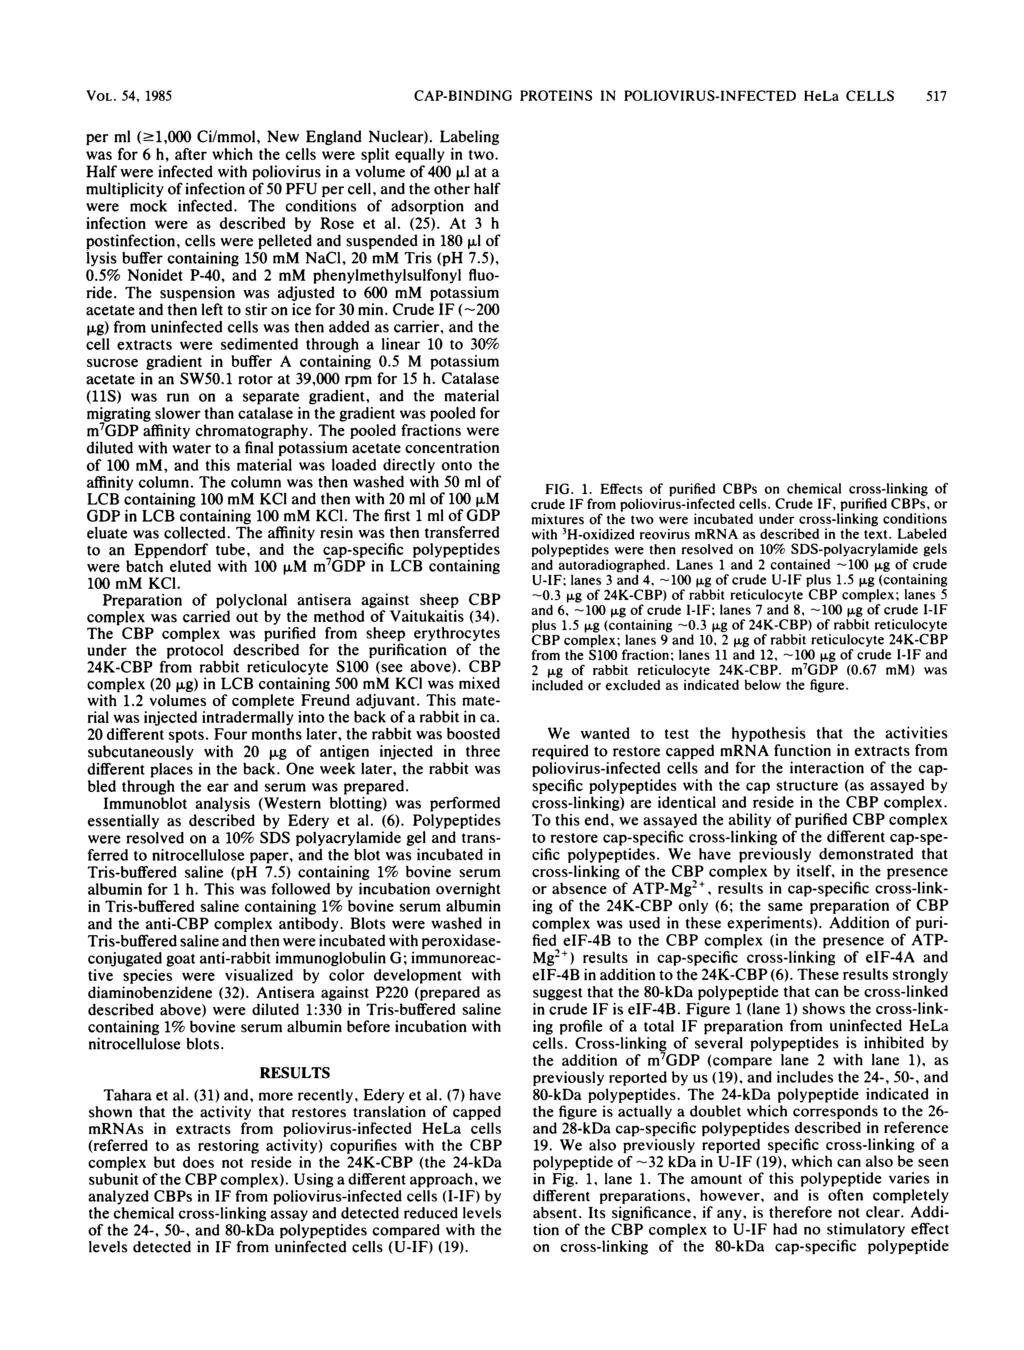 VOL. 54, 1985 CAP-BINDING PROTEINS IN POLIOVIRUS-INFECTED HeLa CELLS 517 per ml (.1,000 Ci/mmol, New England Nuclear). Labeling was for 6 h, after which the cells were split equally in two.